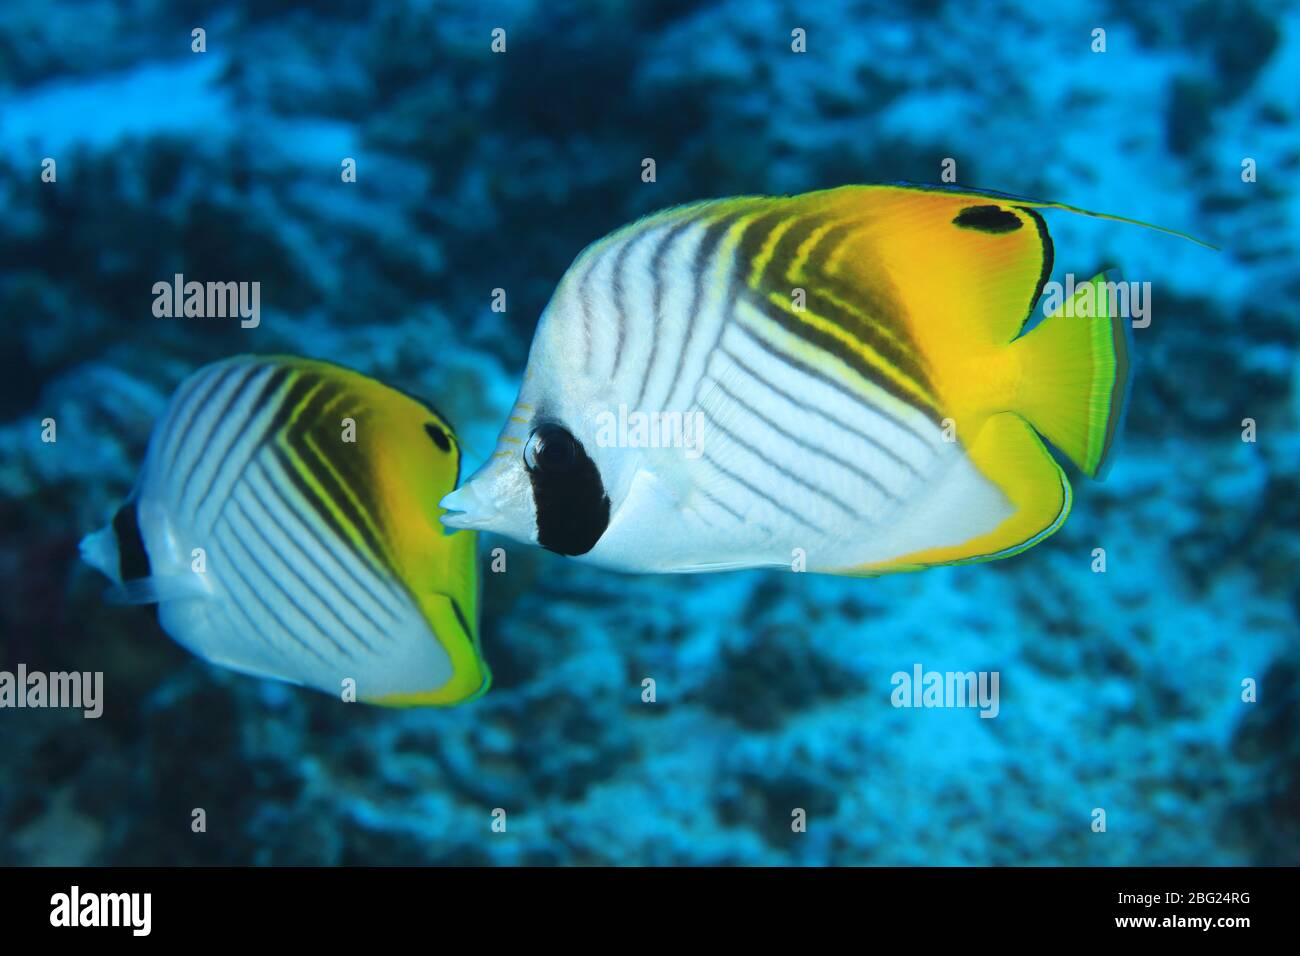 Threadfin butterflyfish (Chaetodon auriga) underwater in the coral reef of the Indian Ocean Stock Photo